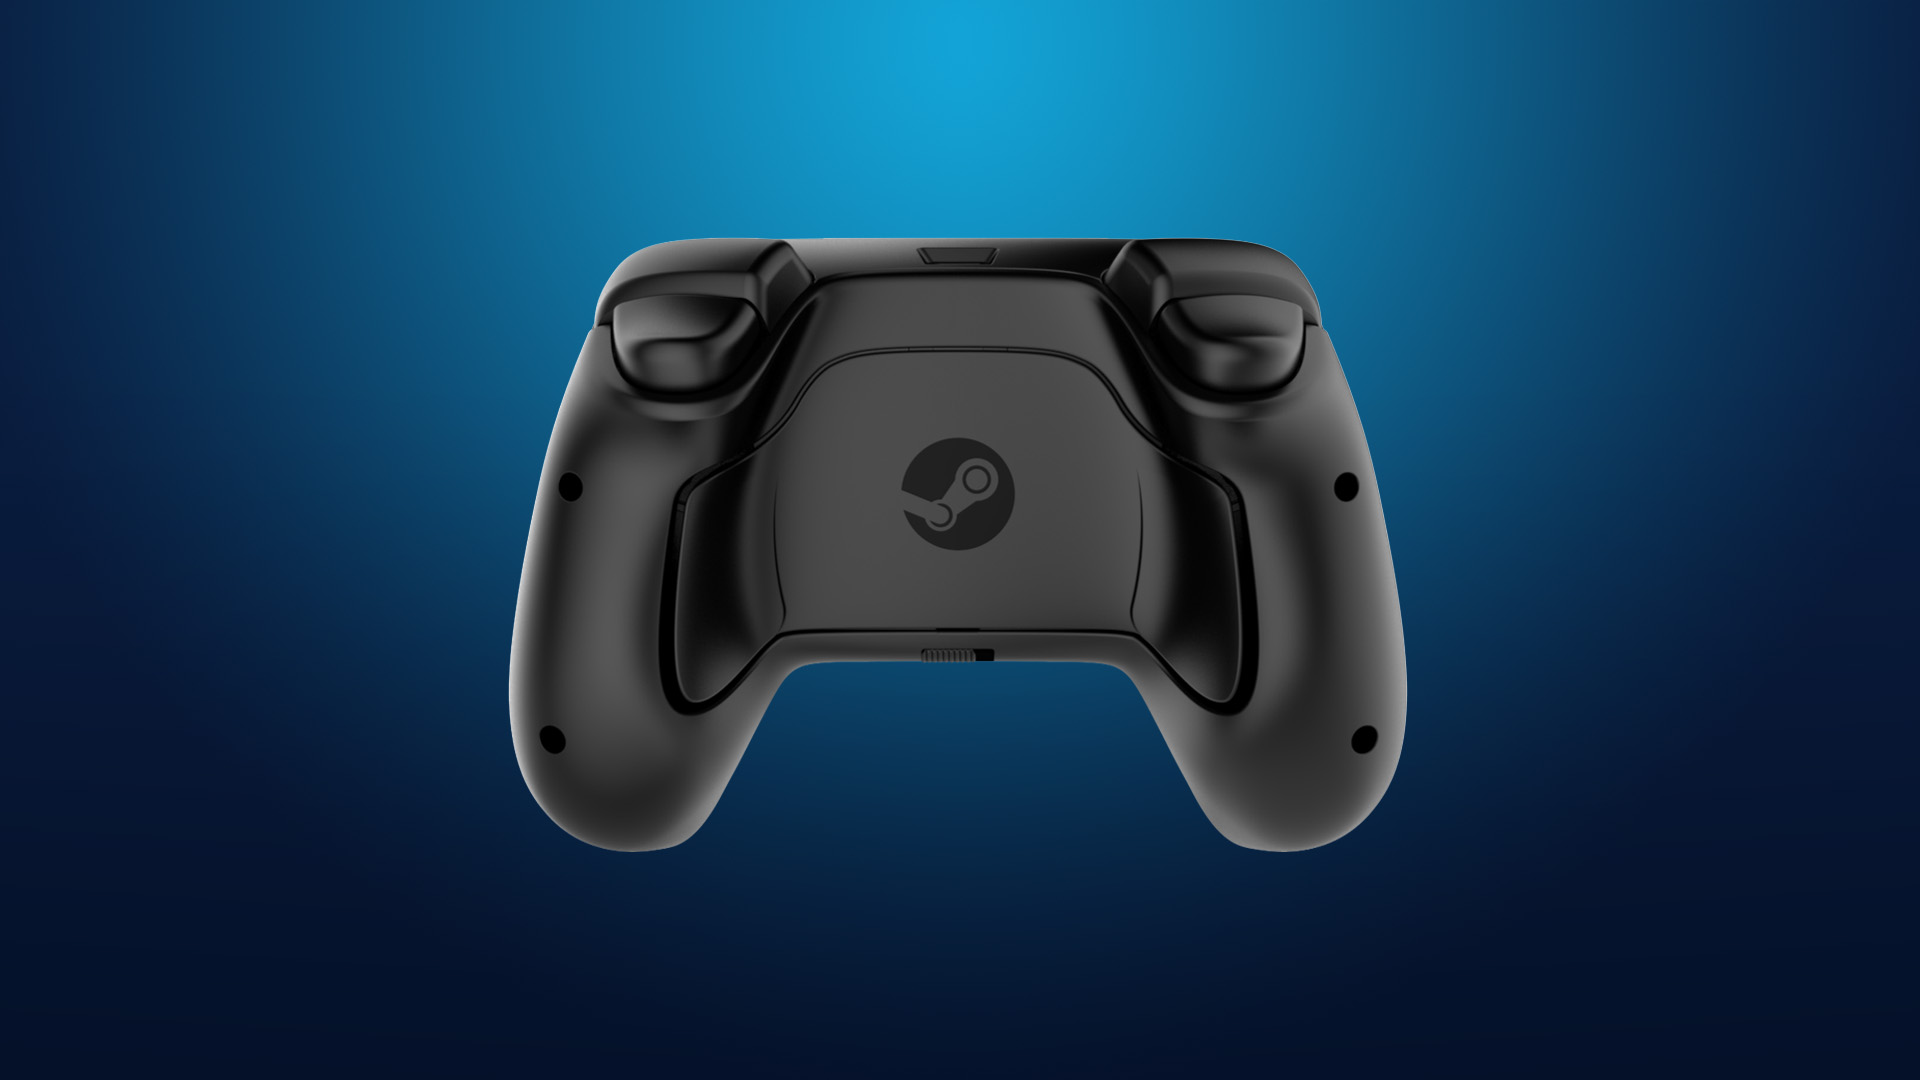 steam controller where to buy